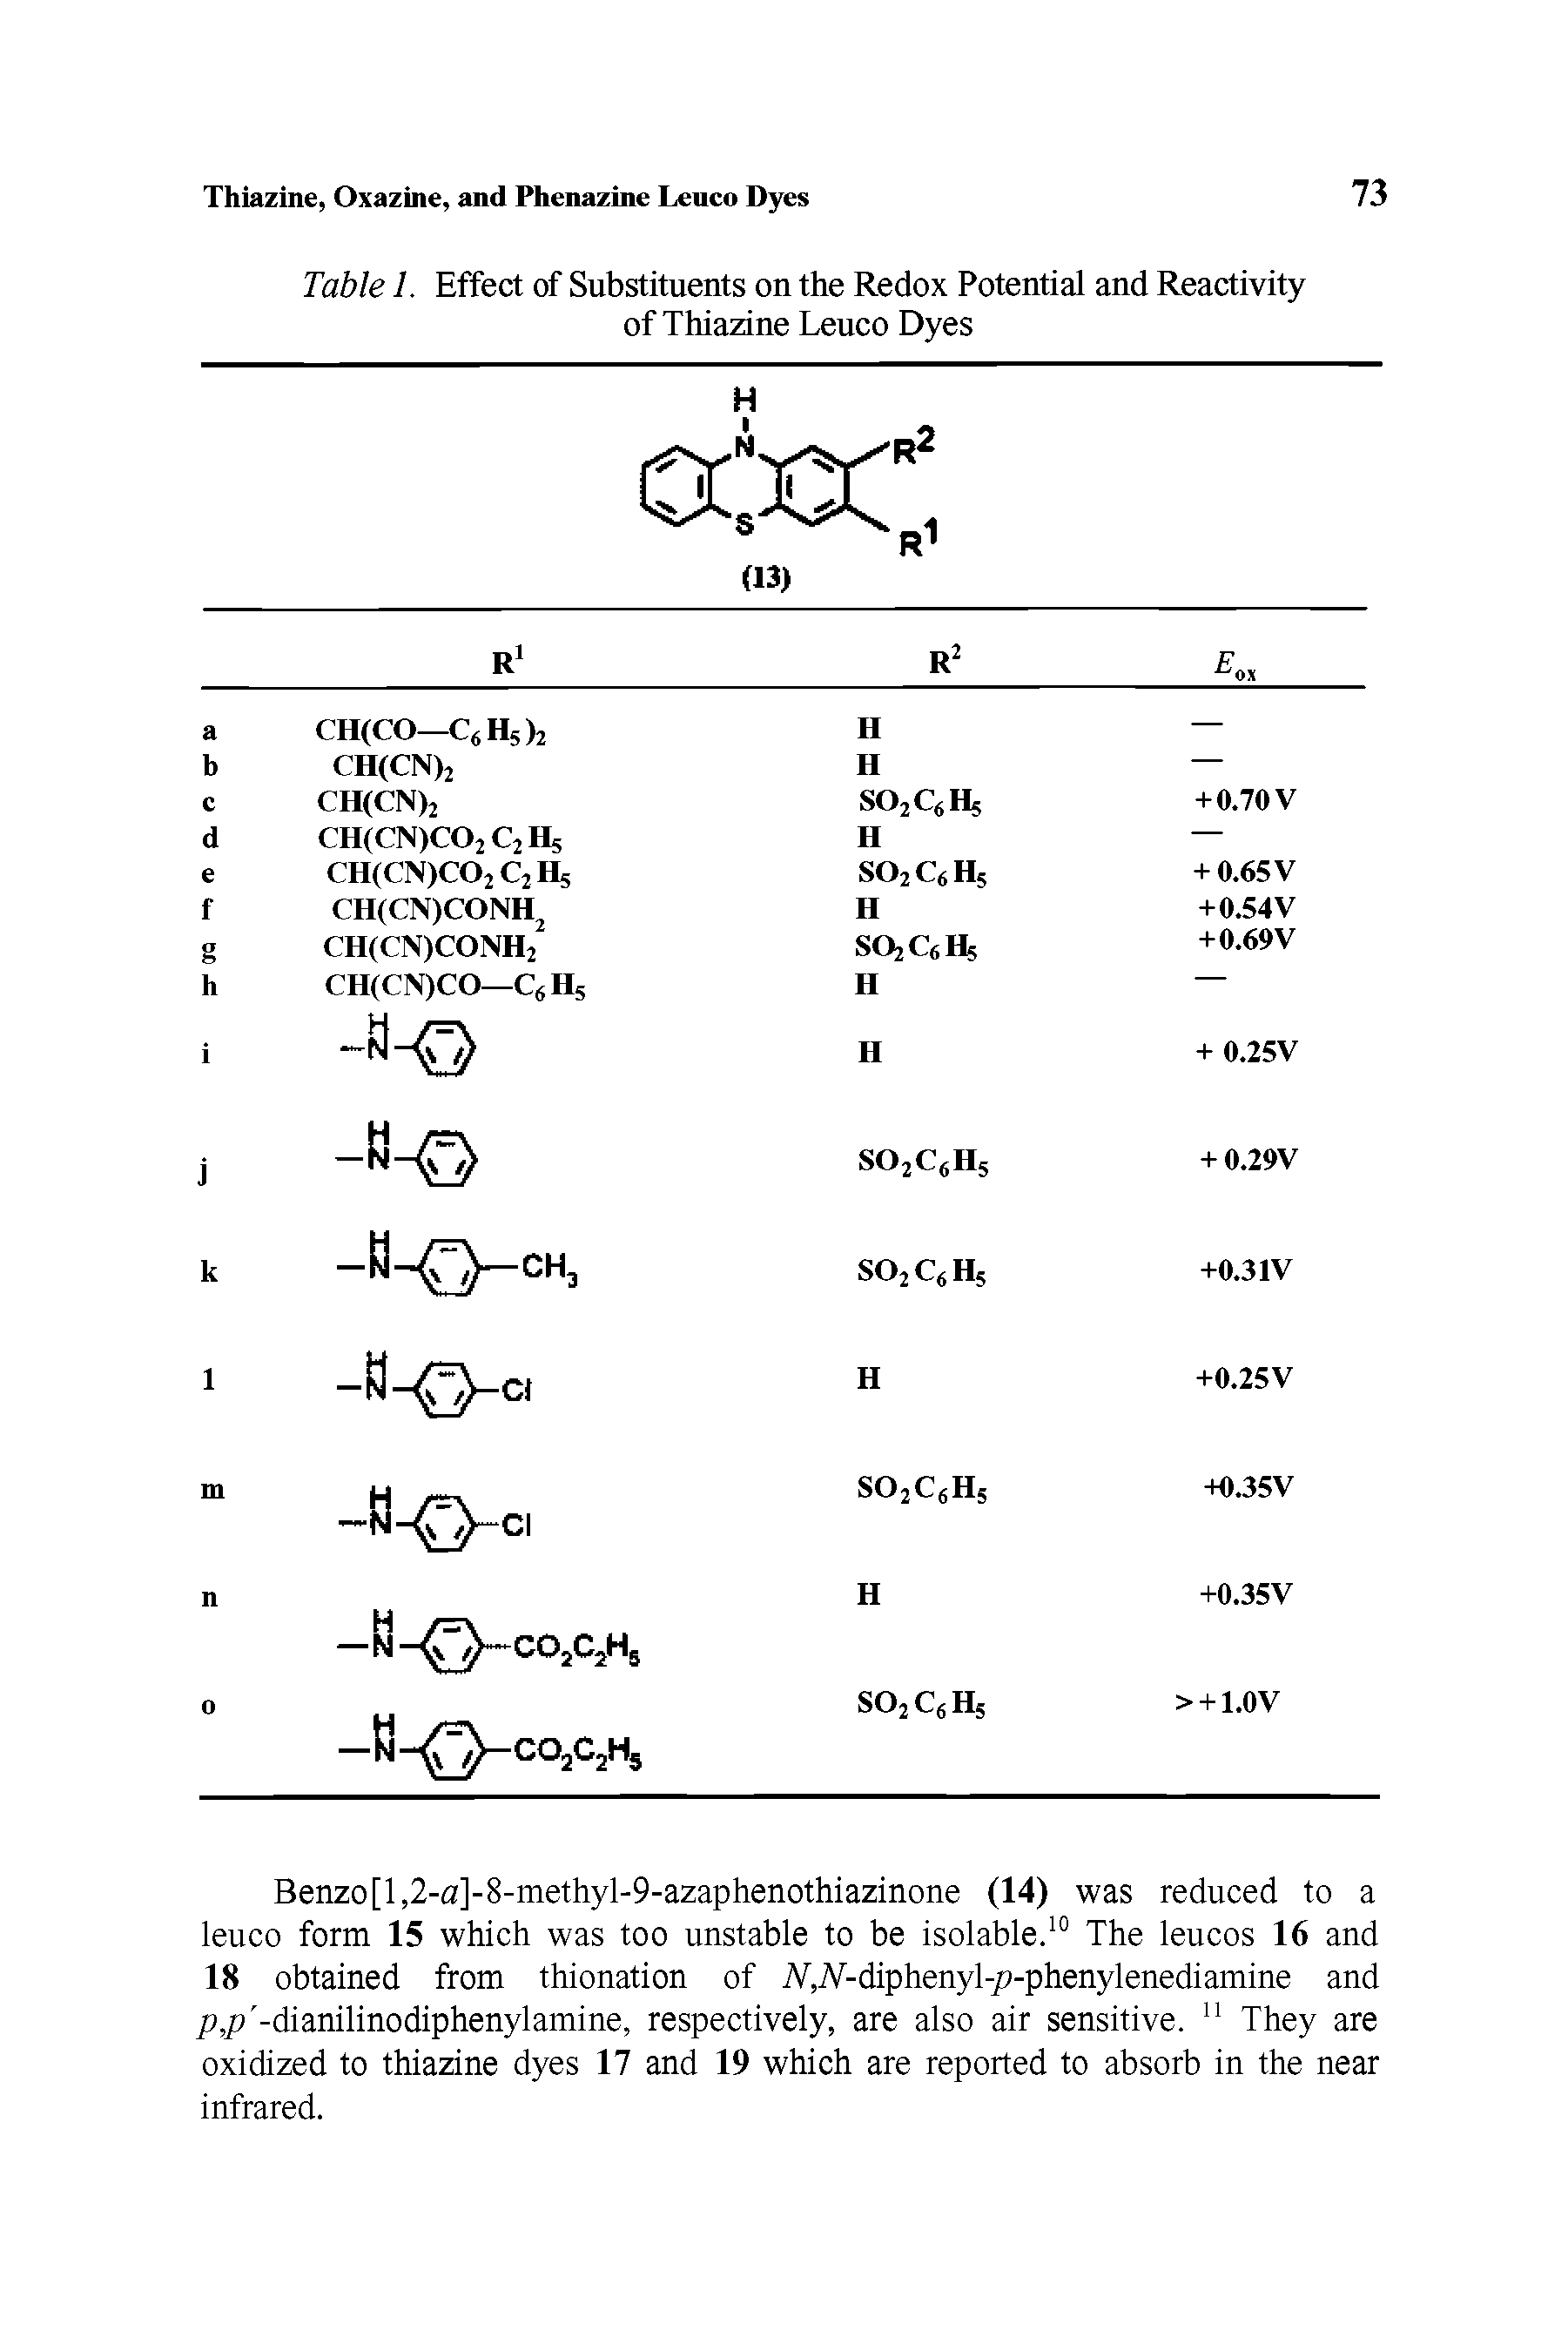 Table 1. Effect of Substituents on the Redox Potential and Reactivity of Thiazine Leuco Dyes...